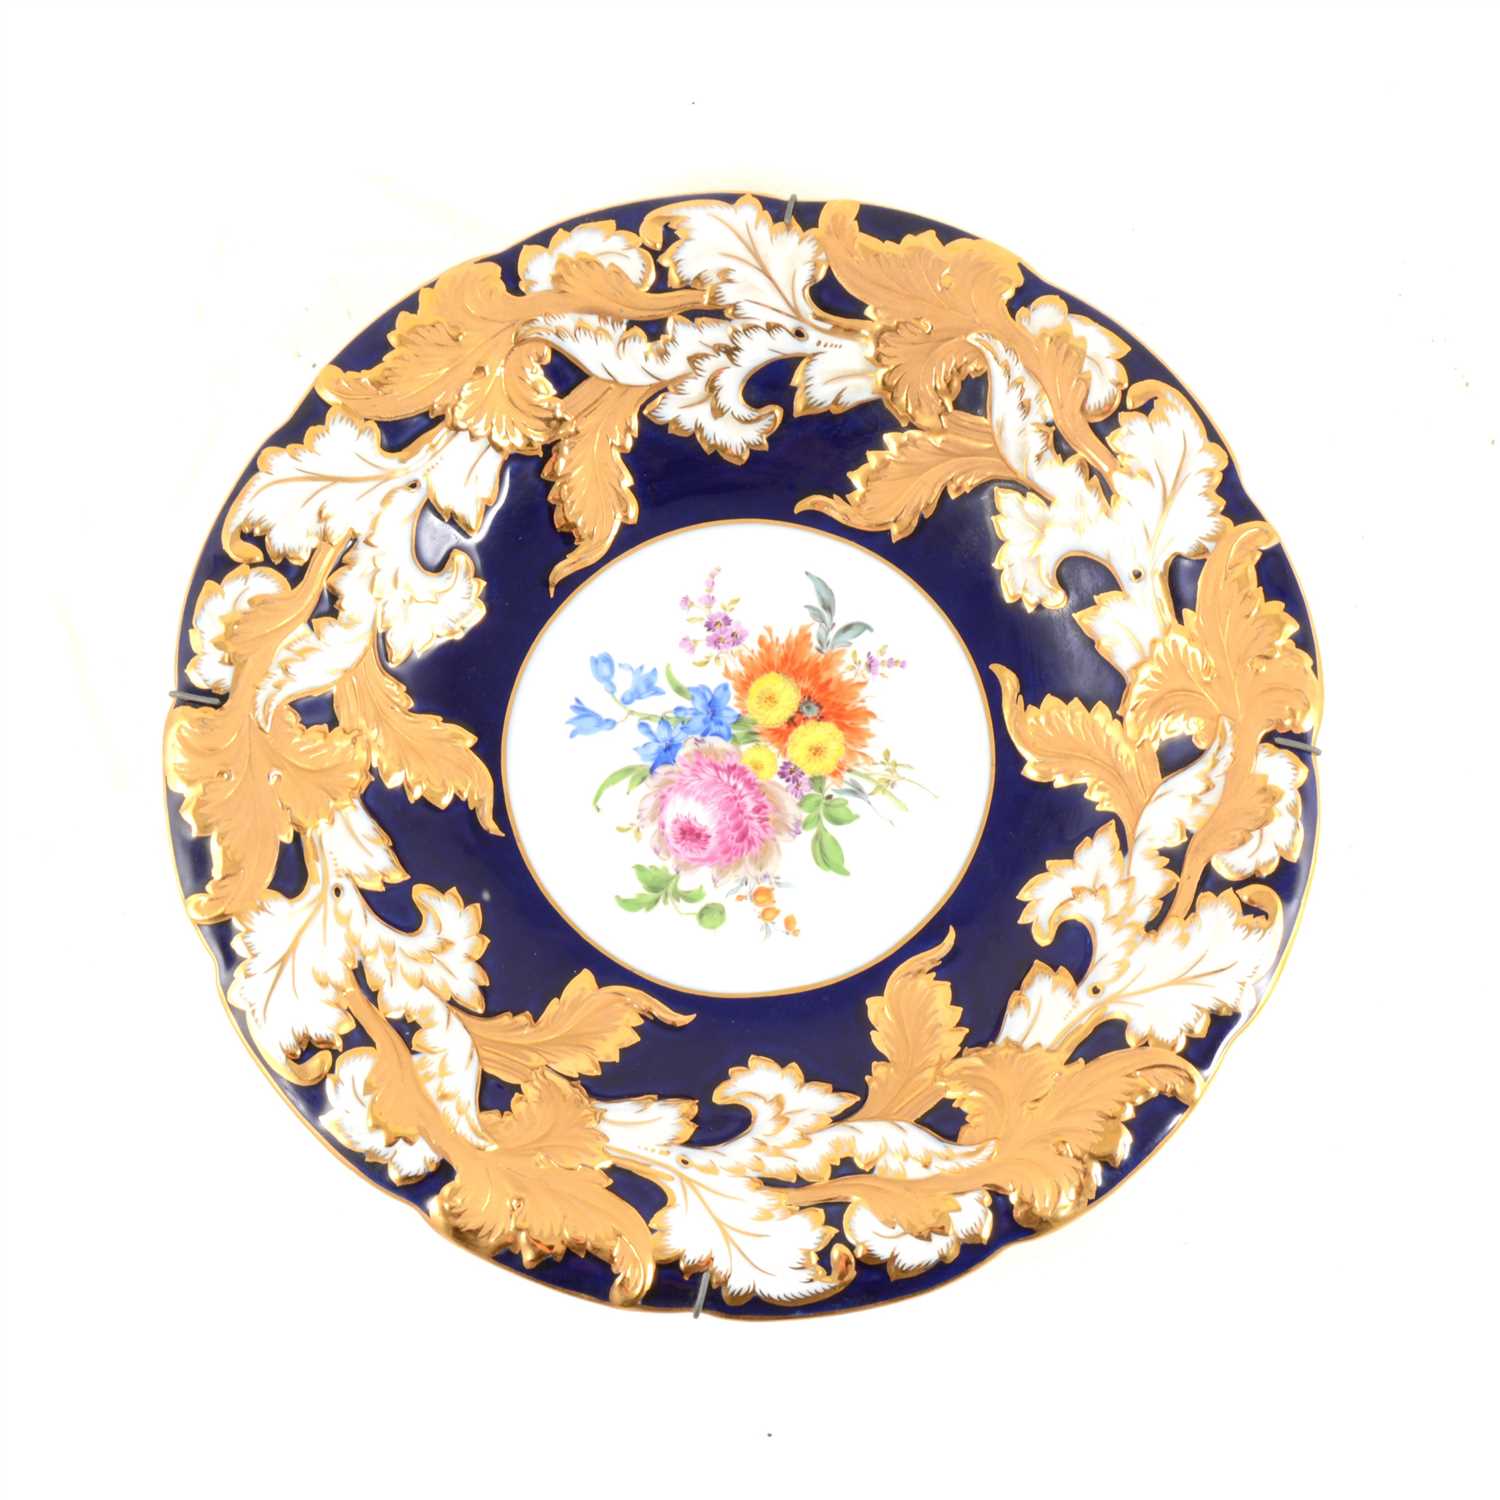 Lot 42 - A Meissen hand painted dish with floral centre, cobalt blue border with gilded acanthus leaf decoration around scalloped rim, impressed C113,  30cm.